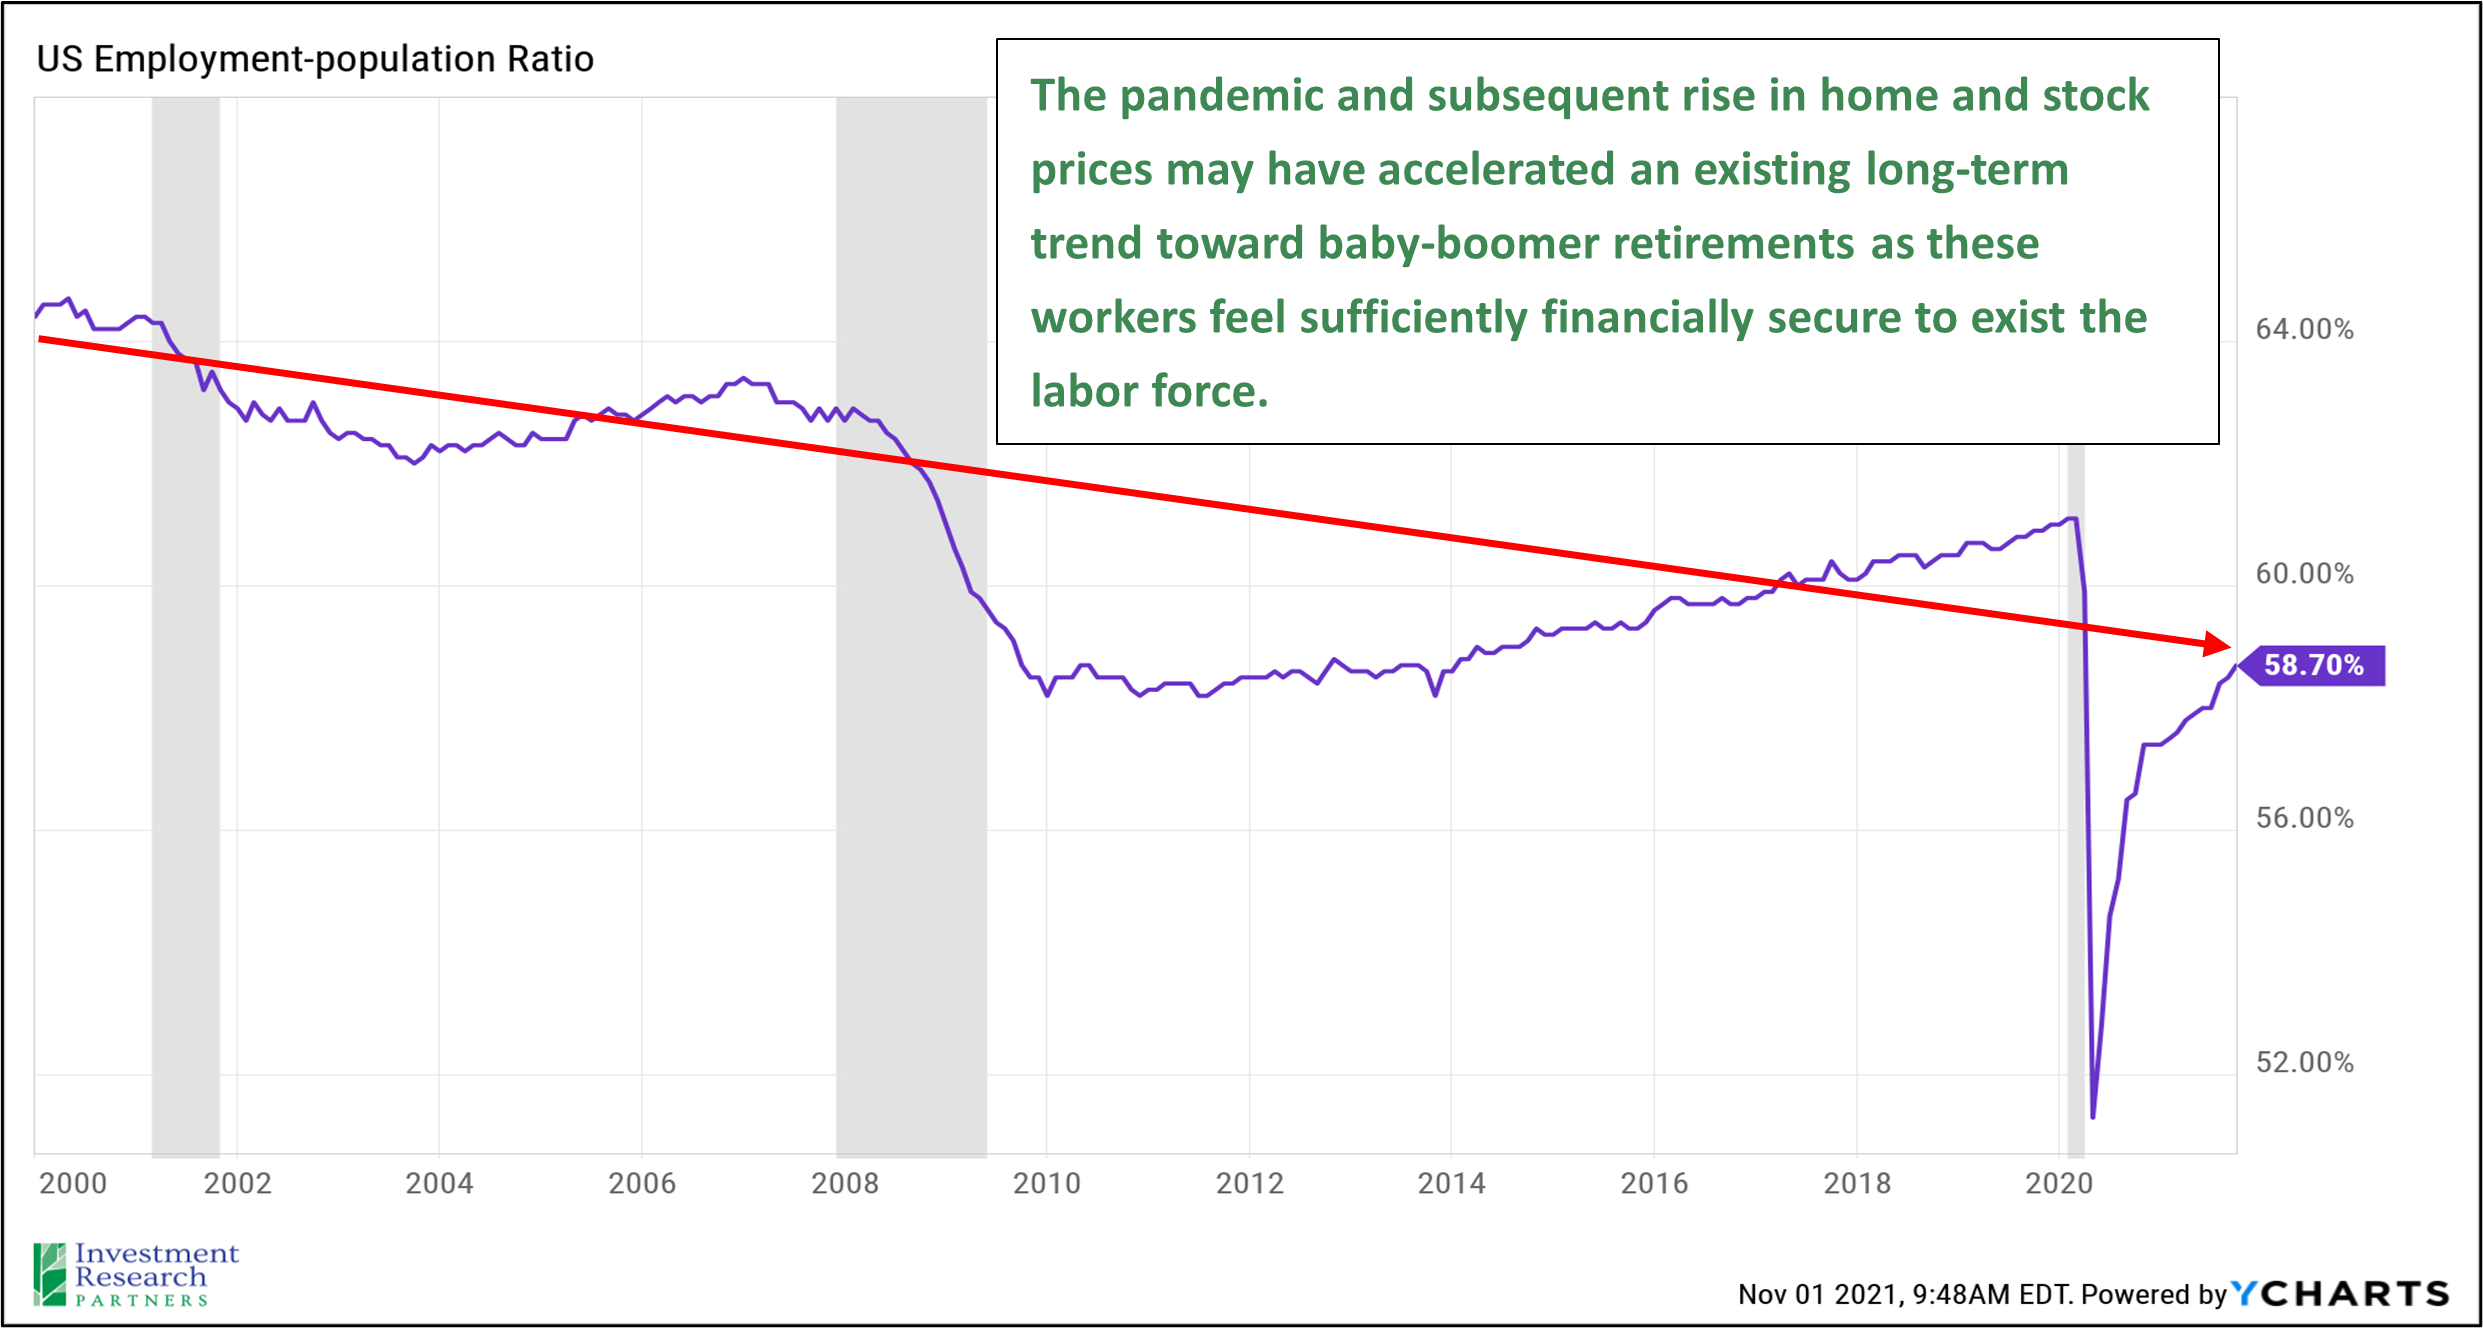 Line graph depicting US Employment-population Ratio from 2000 to 2021 with text that reads: The pandemic and subsequent rise in home and stock prices may have accelerated an existing long-term trend toward baby-boomer retirements as these workers feel sufficiently financially secure to exist the labor force.